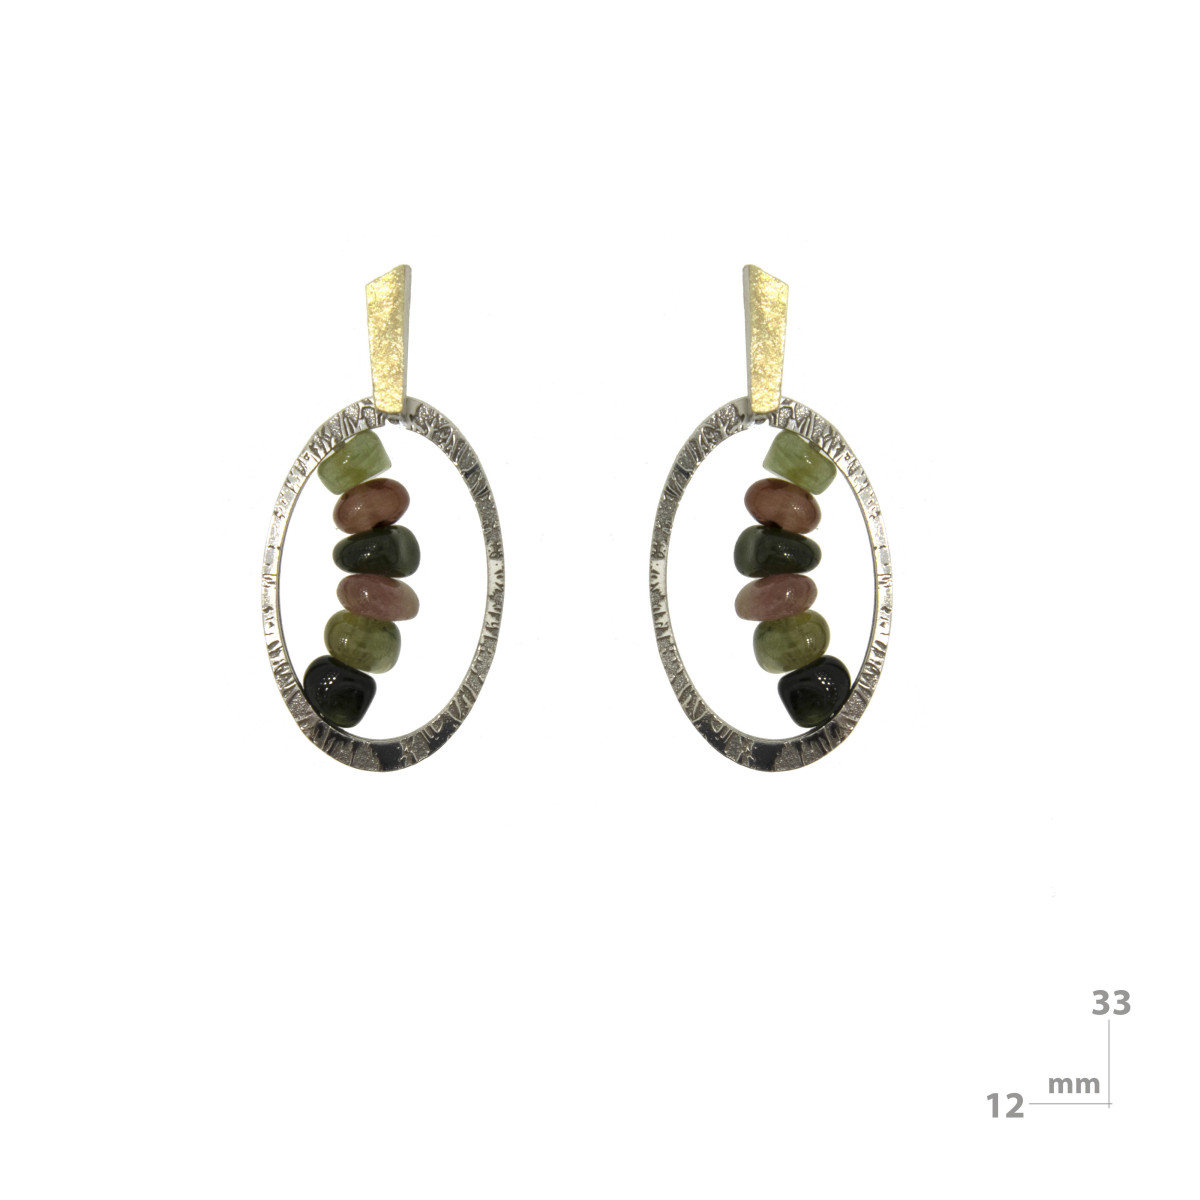 Earrings made of silver, 18k gold and tourmalines